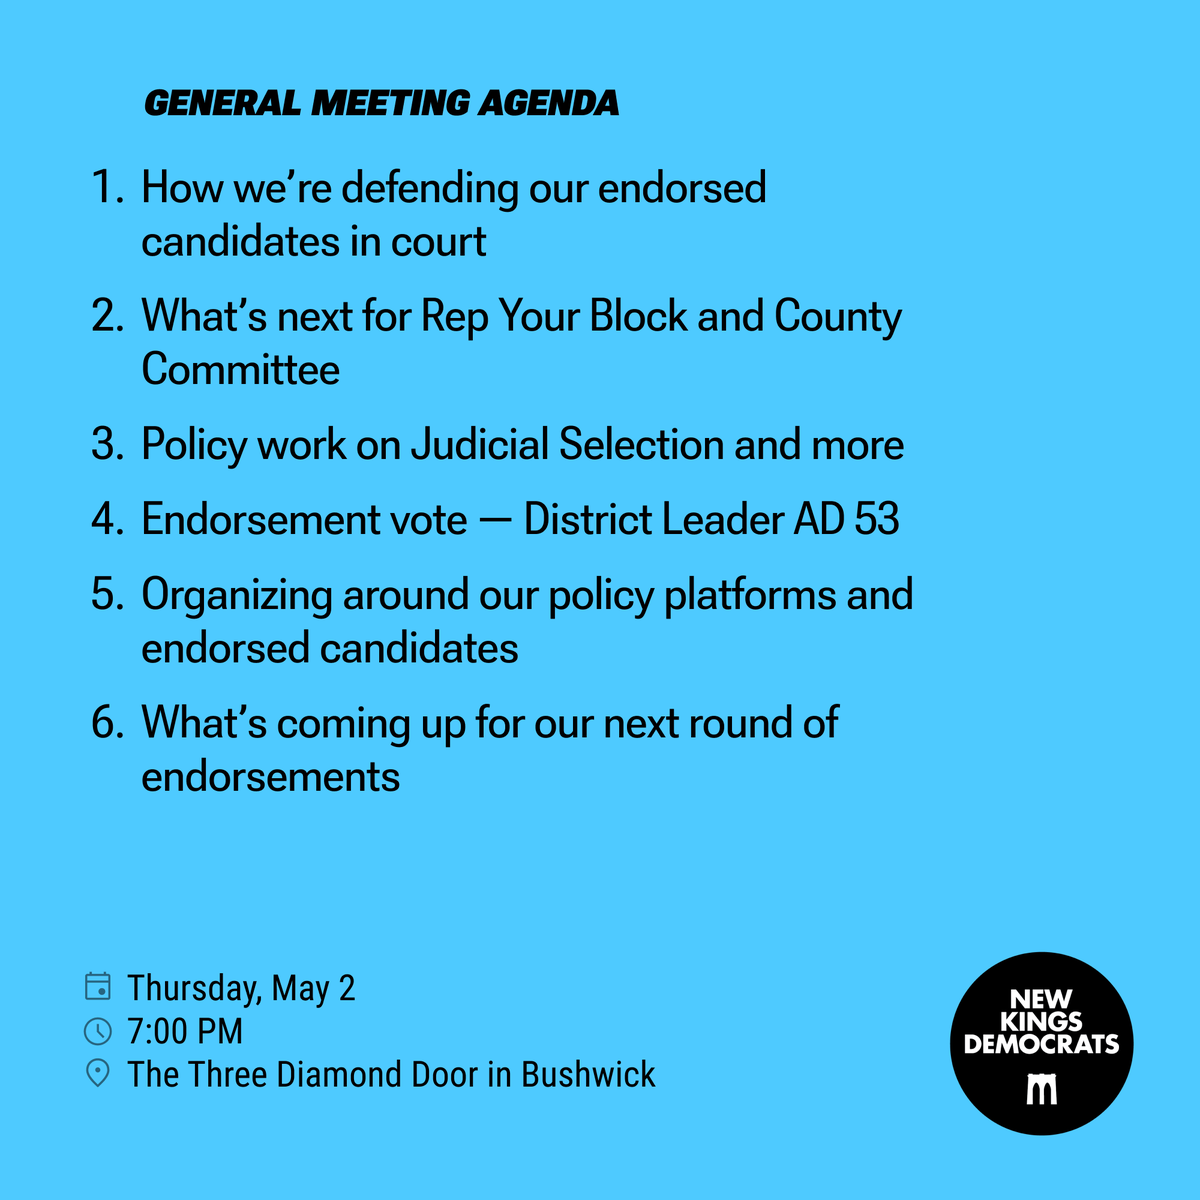 ☀️ Our May 2nd General Meeting will be in person! We'll discuss how we are defending our endorsed candidates in court and keeping the momentum rolling into the June primary. We hope to see you there🌸